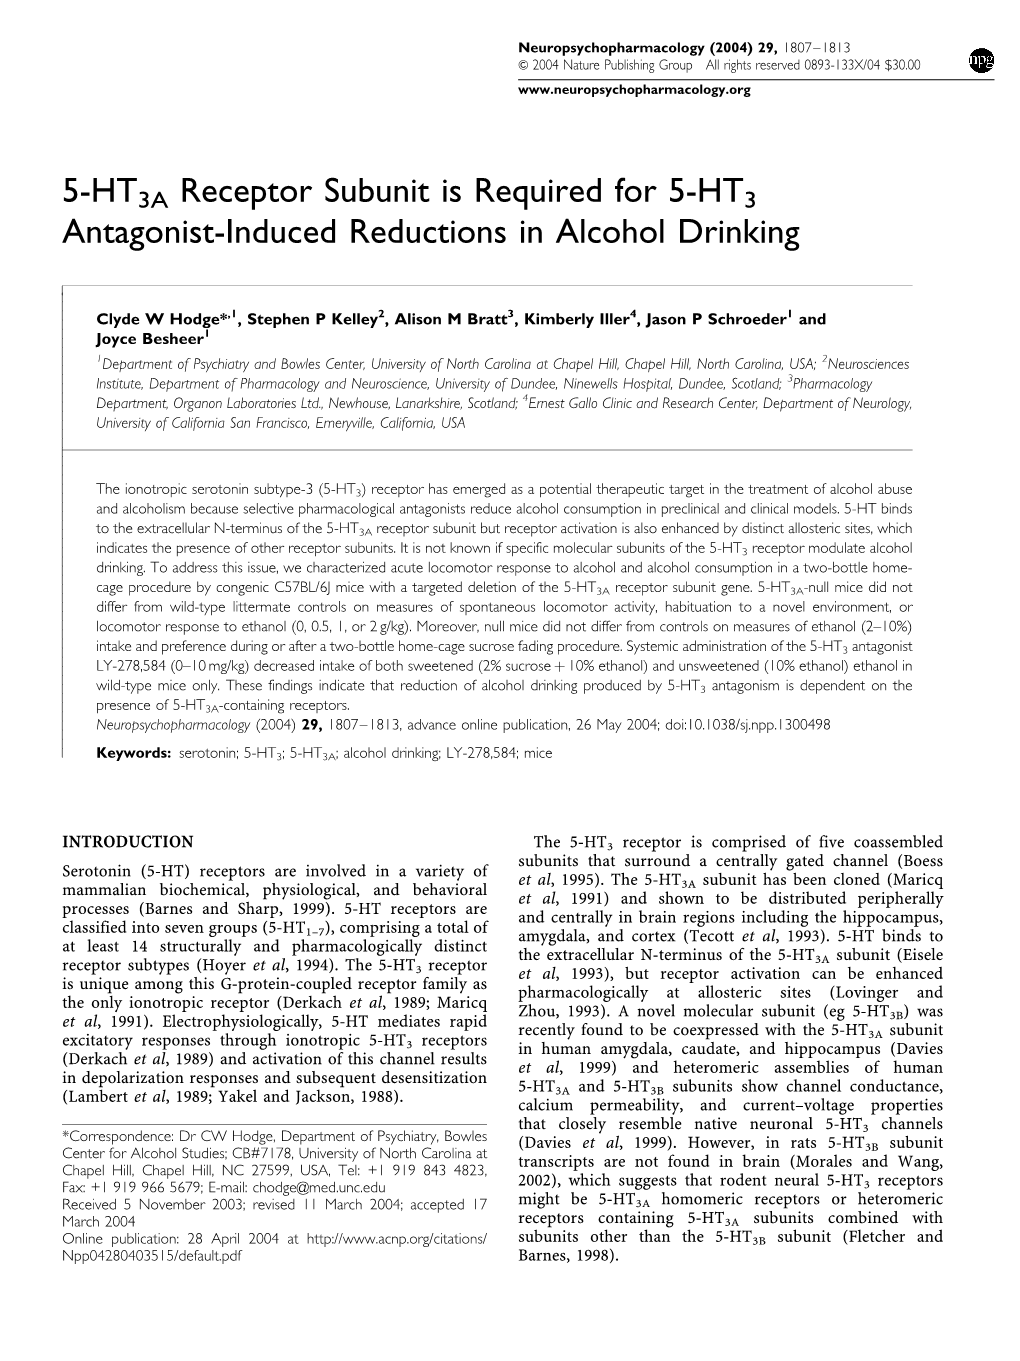 5-HT3A Receptor Subunit Is Required for 5-HT3 Antagonist-Induced Reductions in Alcohol Drinking